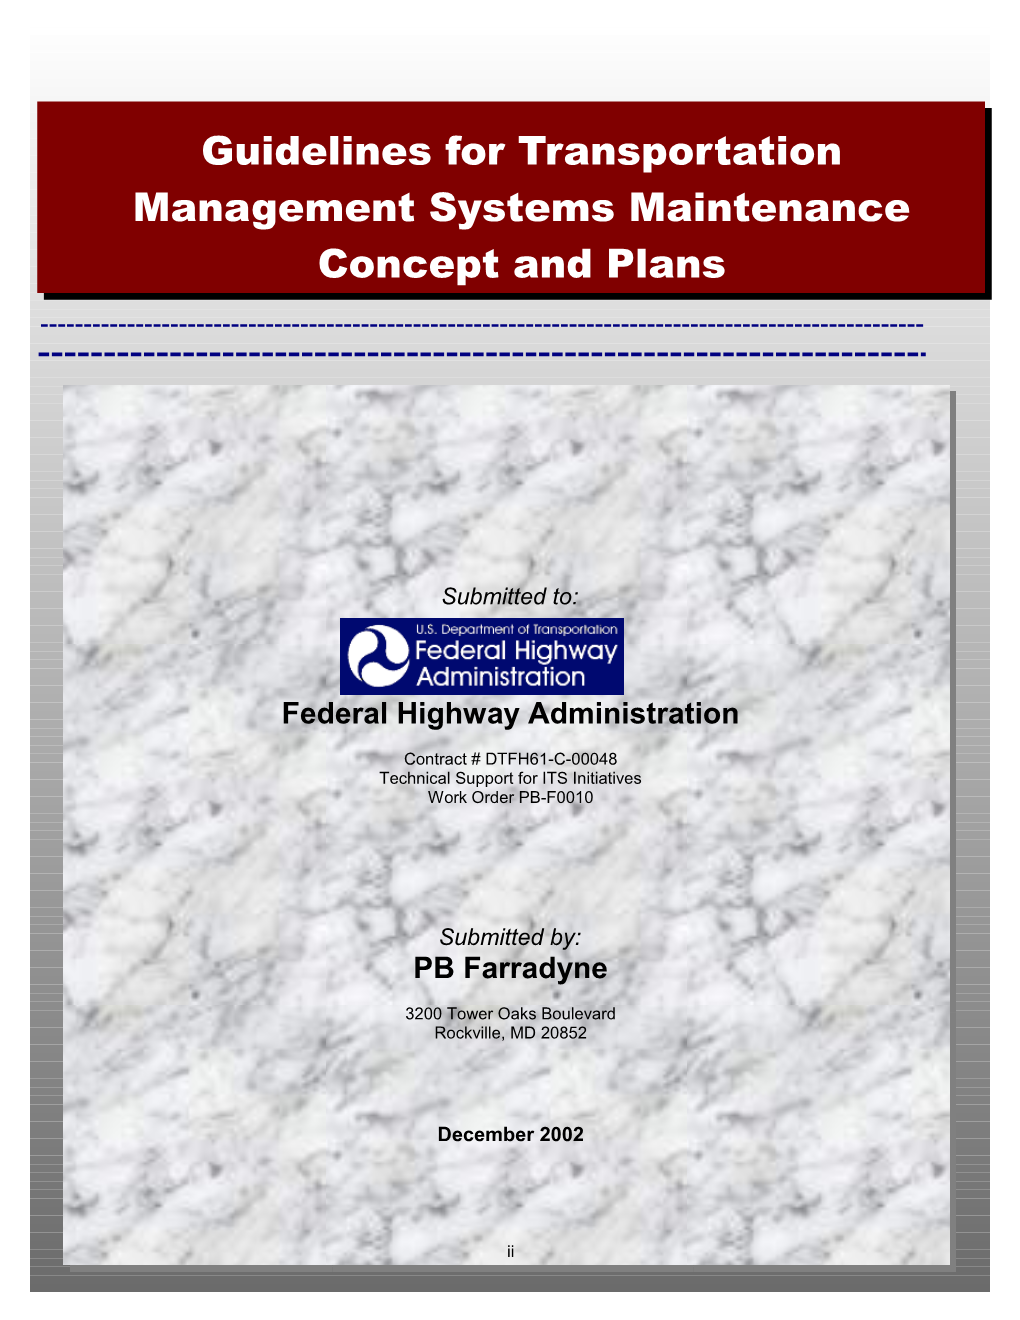 Guidelines for Transportation Management Systems Maintenance Concepts and Plans October 1St 2002